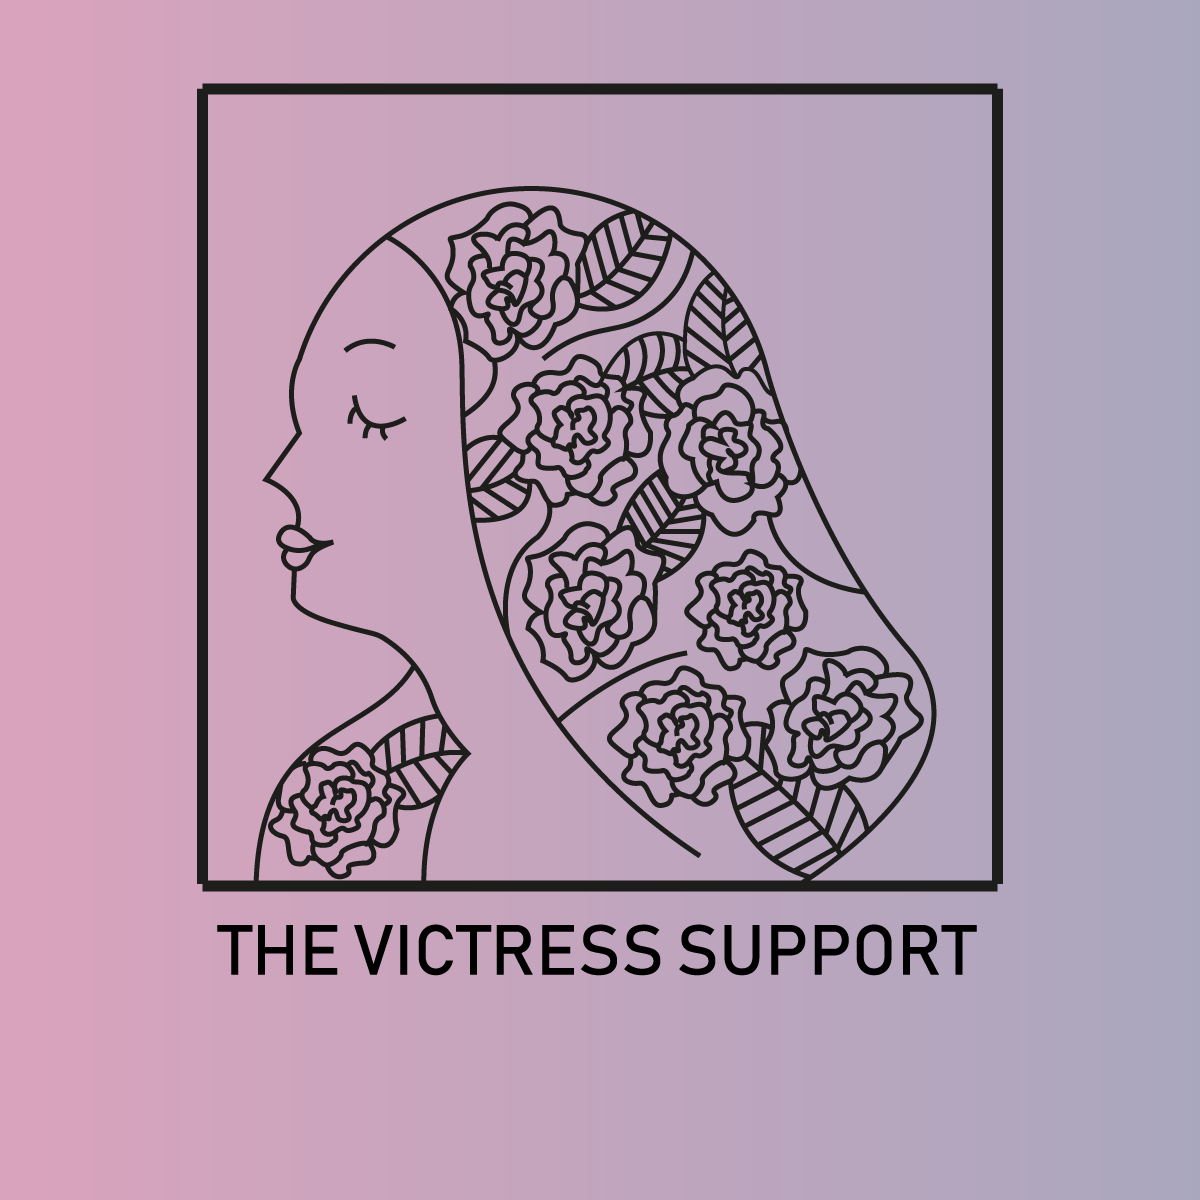 The Victress Support